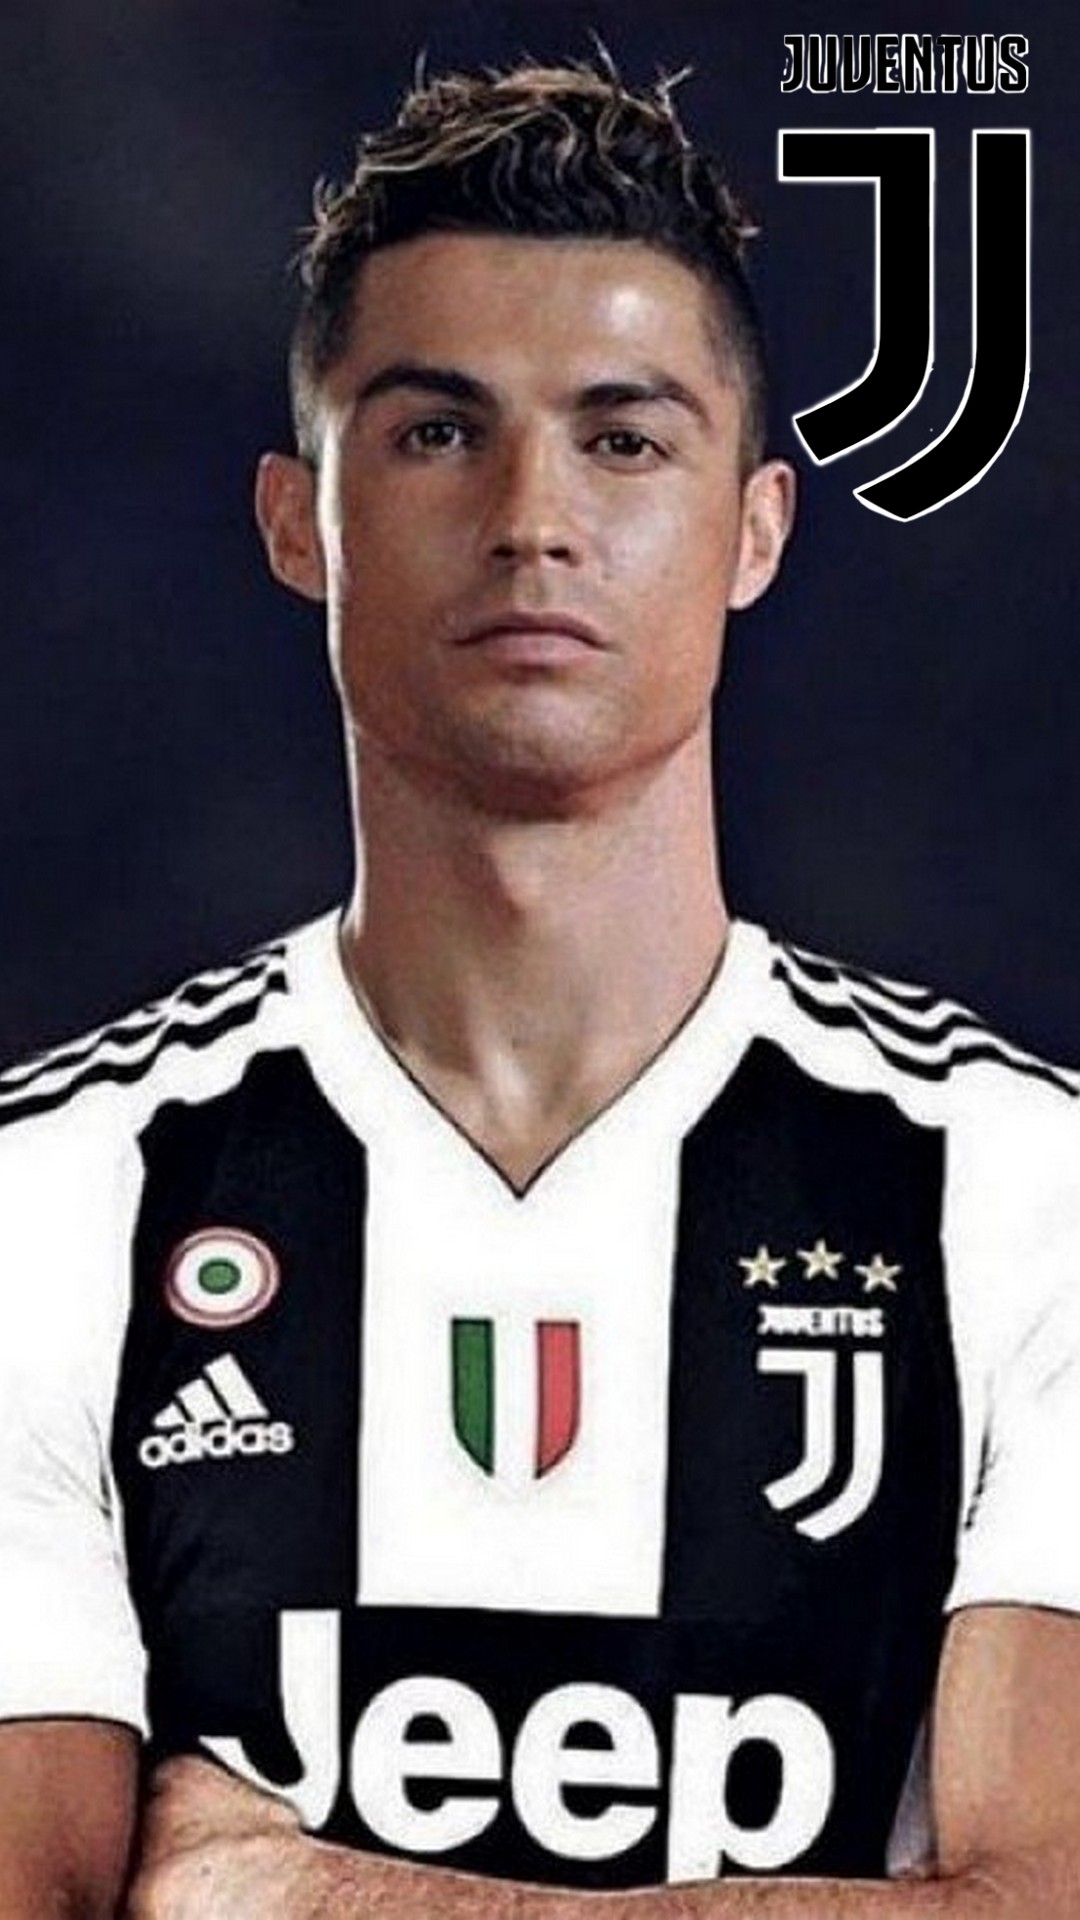 Cristiano Ronaldo Juventus iPhone 8 Wallpaper With Resolution 1080X1920 pixel. You can make this wallpaper for your Mac or Windows Desktop Background, iPhone, Android or Tablet and another Smartphone device for free